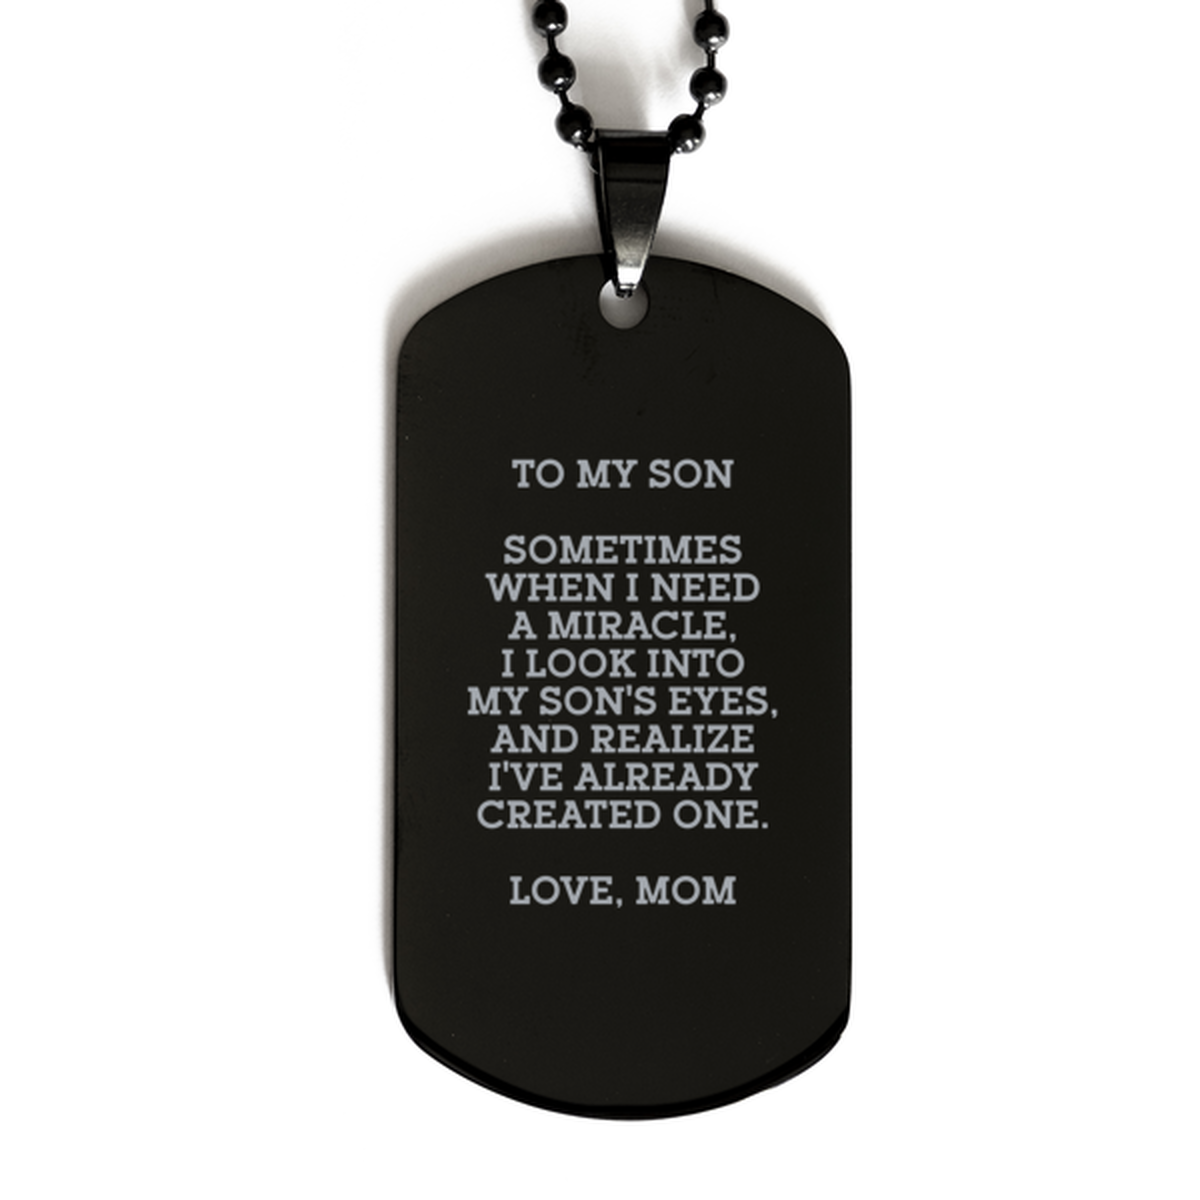 To My Son Black Dog Tag, Sometimes When I Need A Miracle, Graduation Day Gifts For Son From Mom, Birthday Gifts For Men